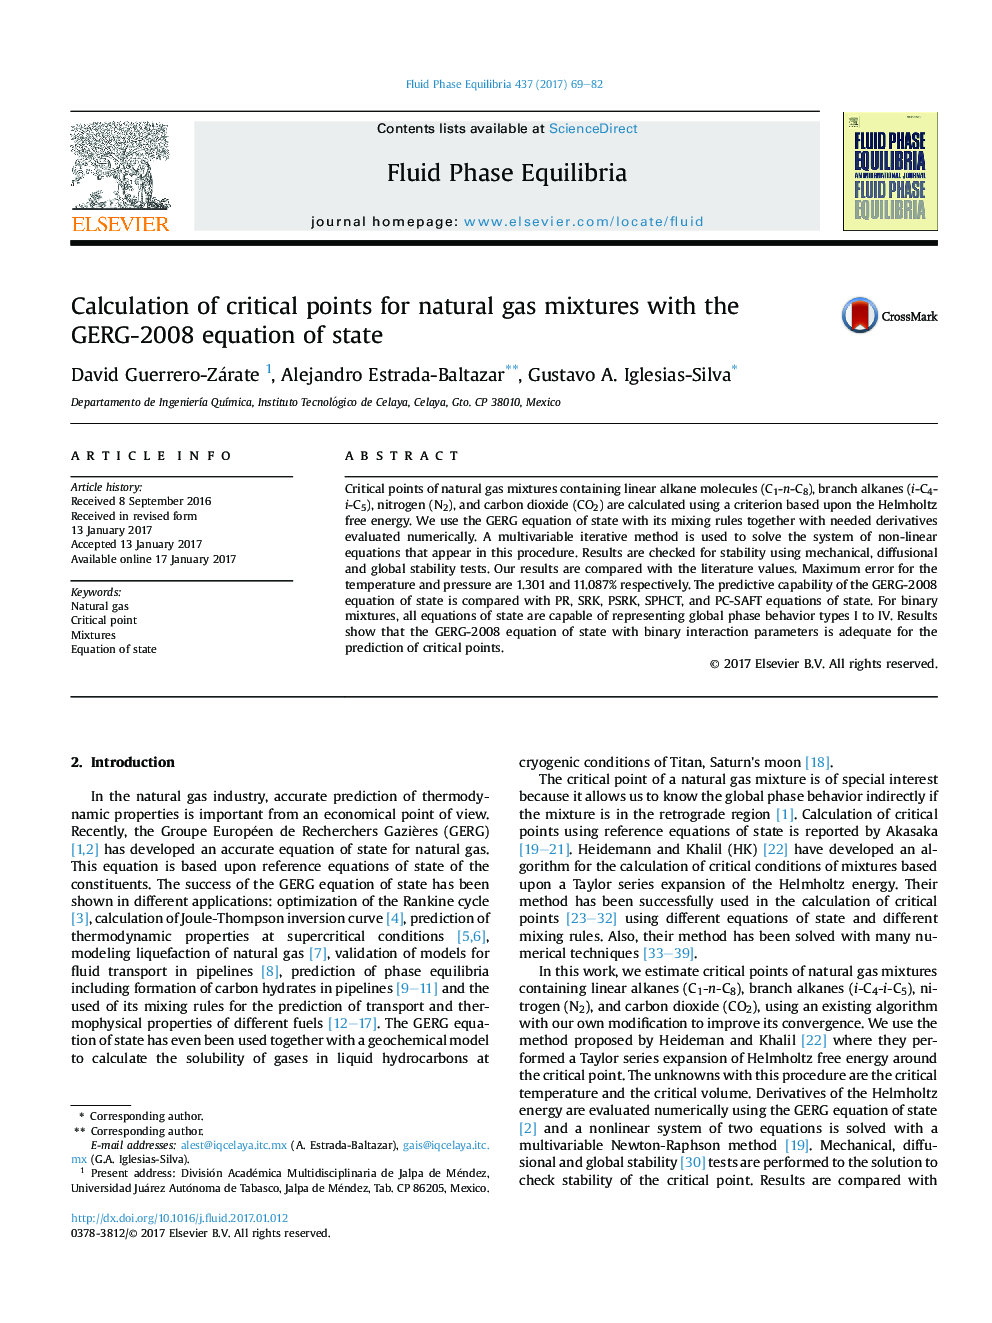 Calculation of critical points for natural gas mixtures with the GERG-2008 equation of state